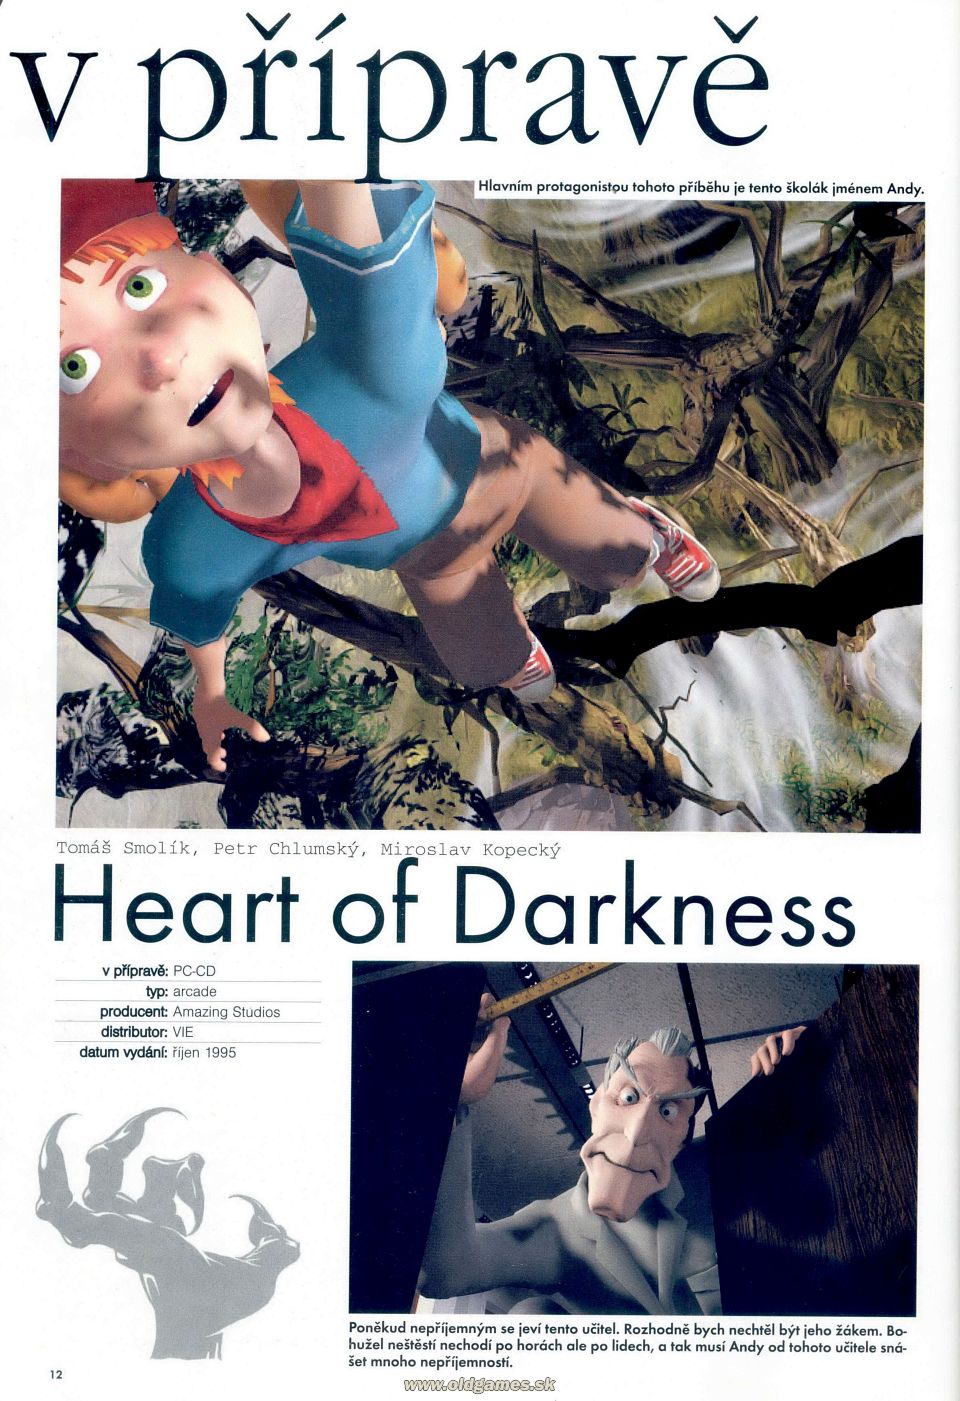 Heart of Darkness - Preview